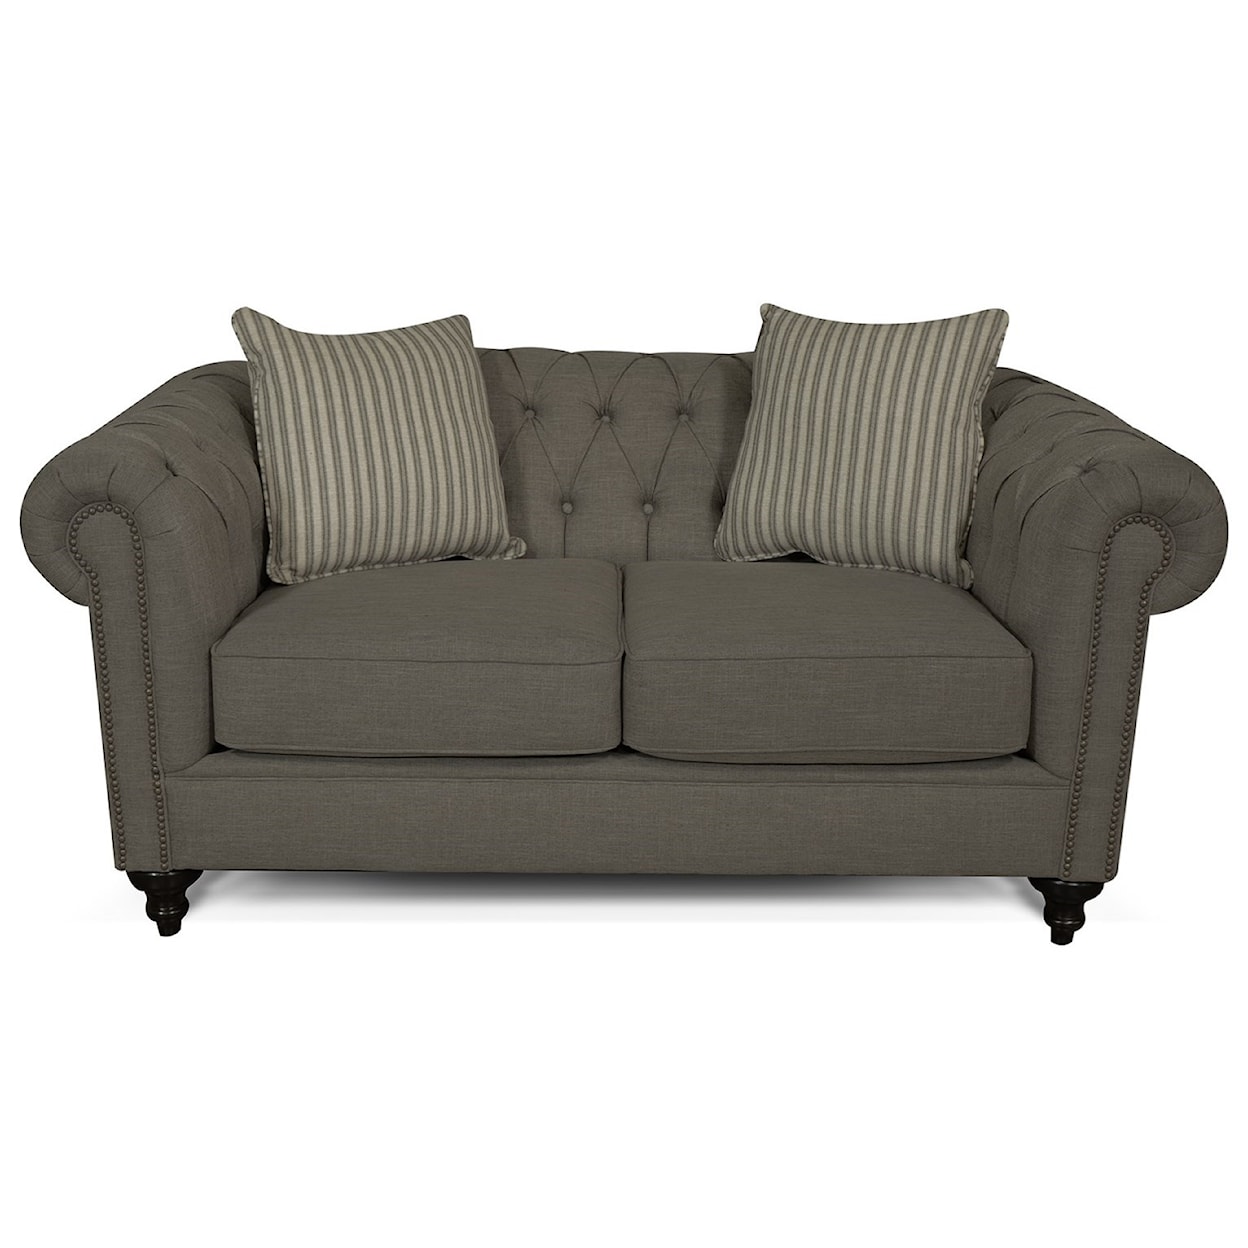 Tennessee Custom Upholstery Ruby 4H00 Loveseat with Button Tufted Back